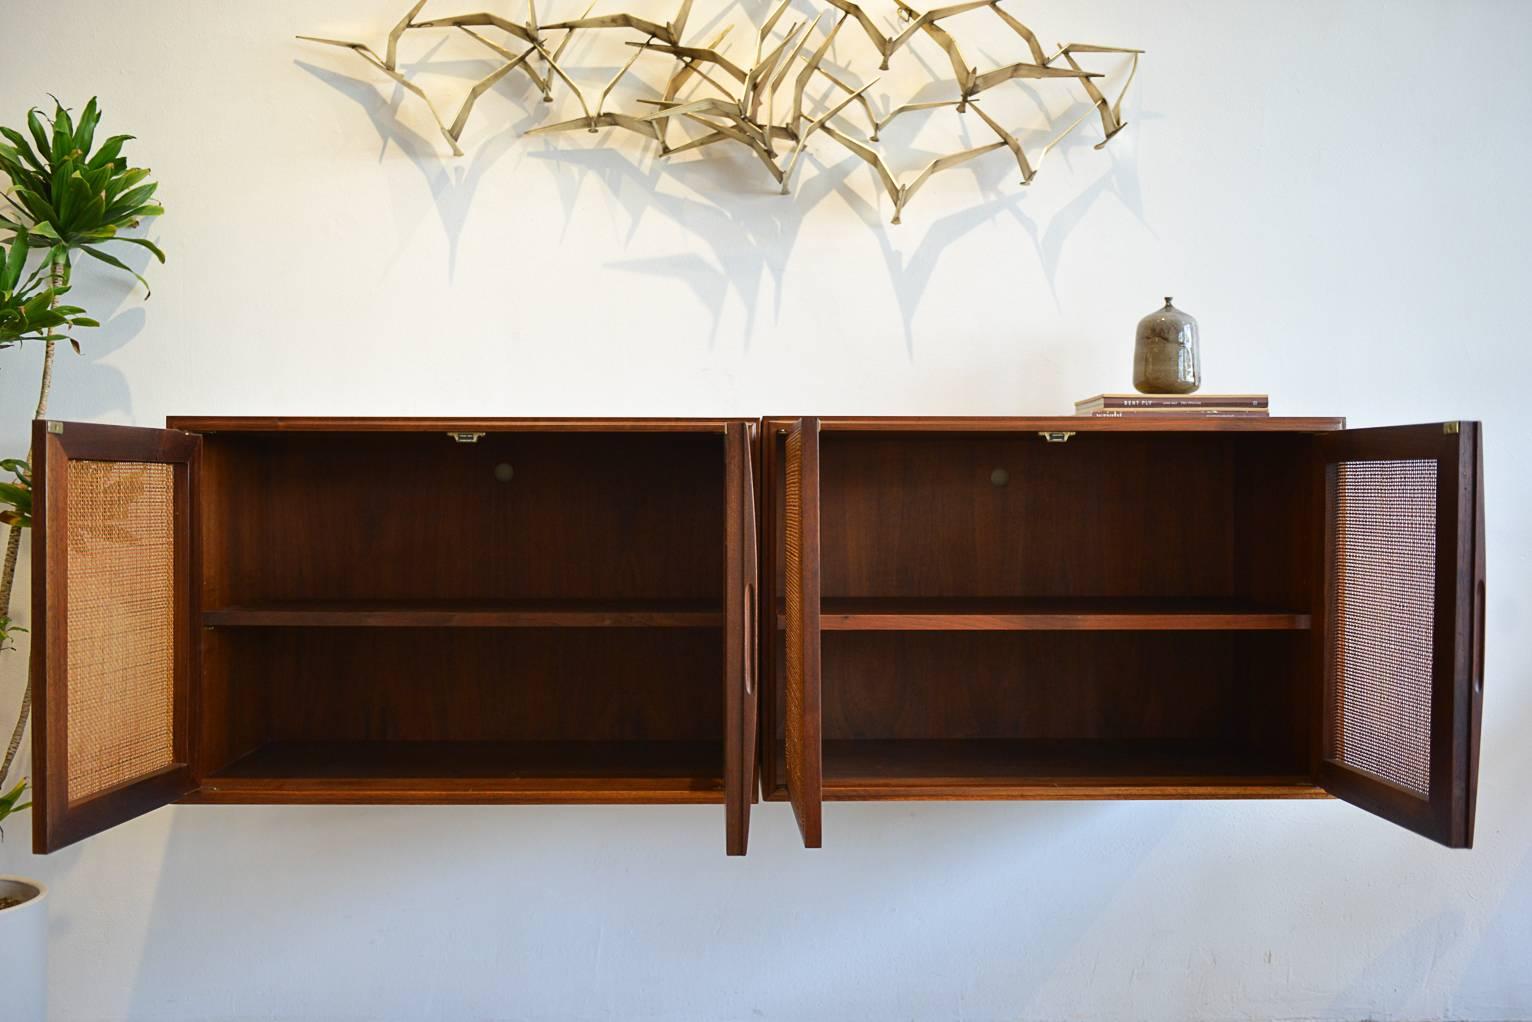 Beautiful walnut and cane front floating wall-mounted cabinets with inner adjustable shelving. Originally from the Palm Springs estate of Zsa Zsa Gabor. Fully restored walnut. Cane is original, some wear, as shown in photos.

Each cabinet measures